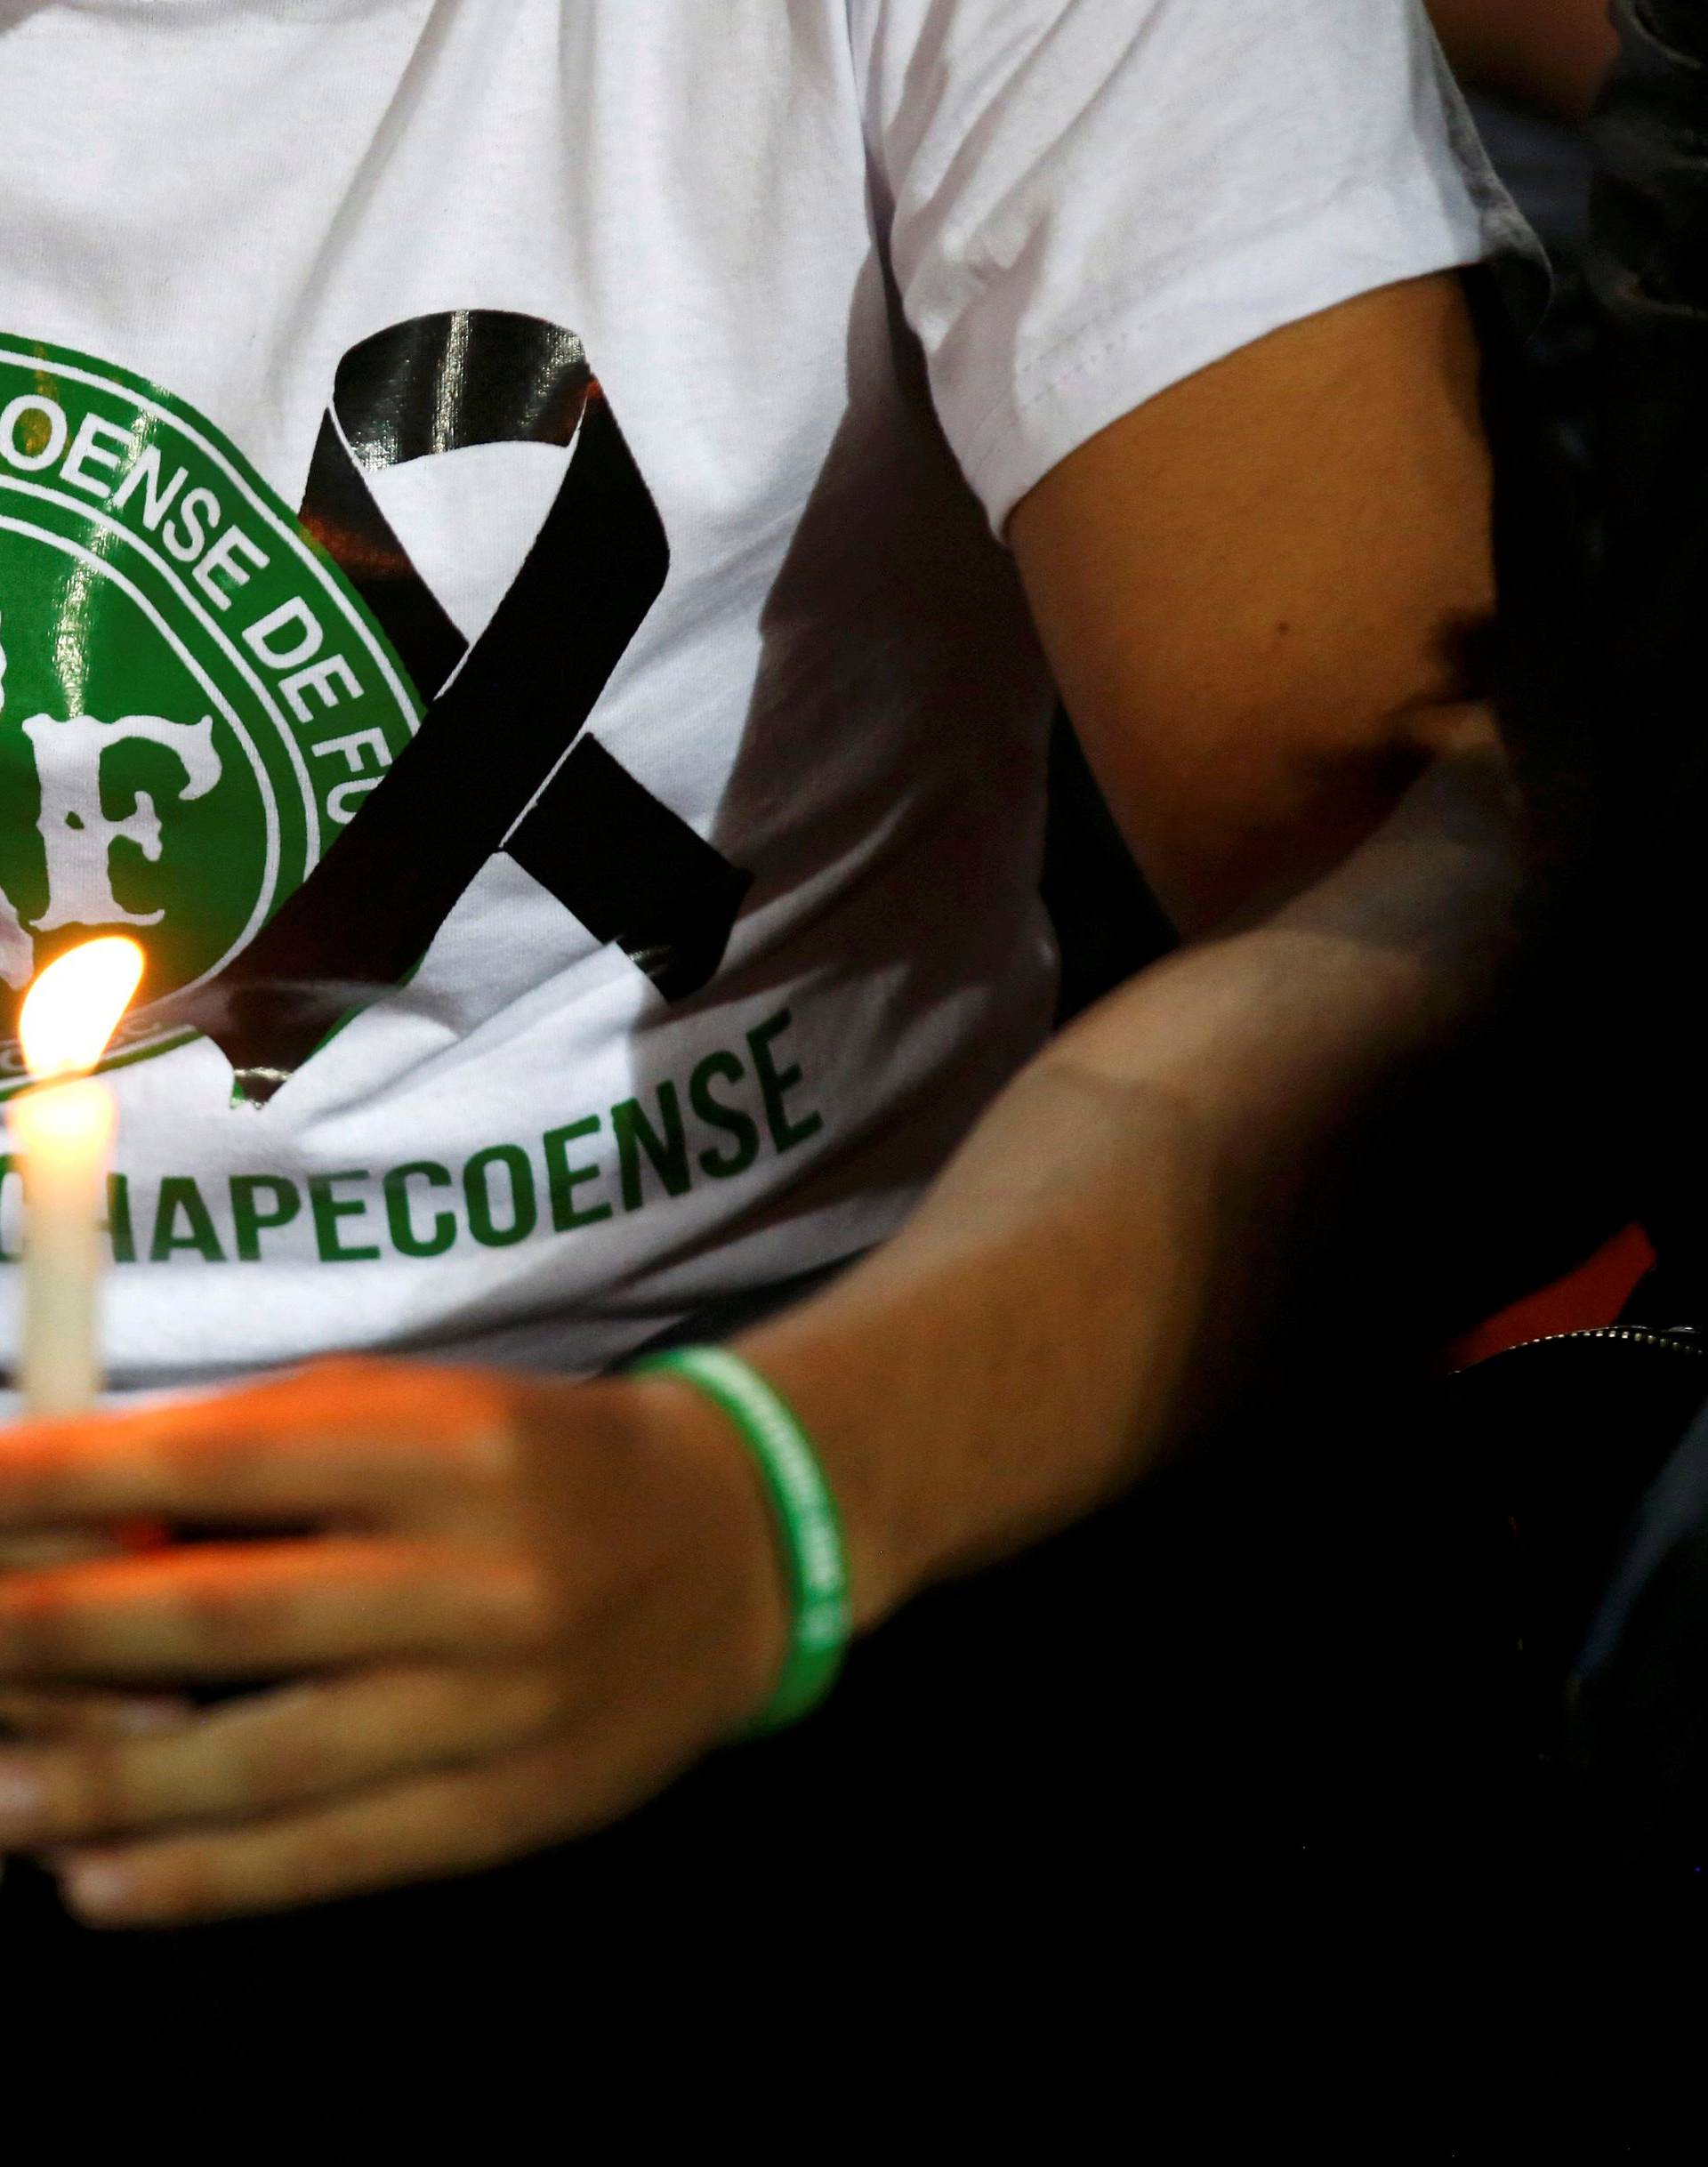 Fan of Atletico Nacional soccer club pays tribute to the players of Brazilian club Chapecoense killed in the recent airplane crash in Medellin